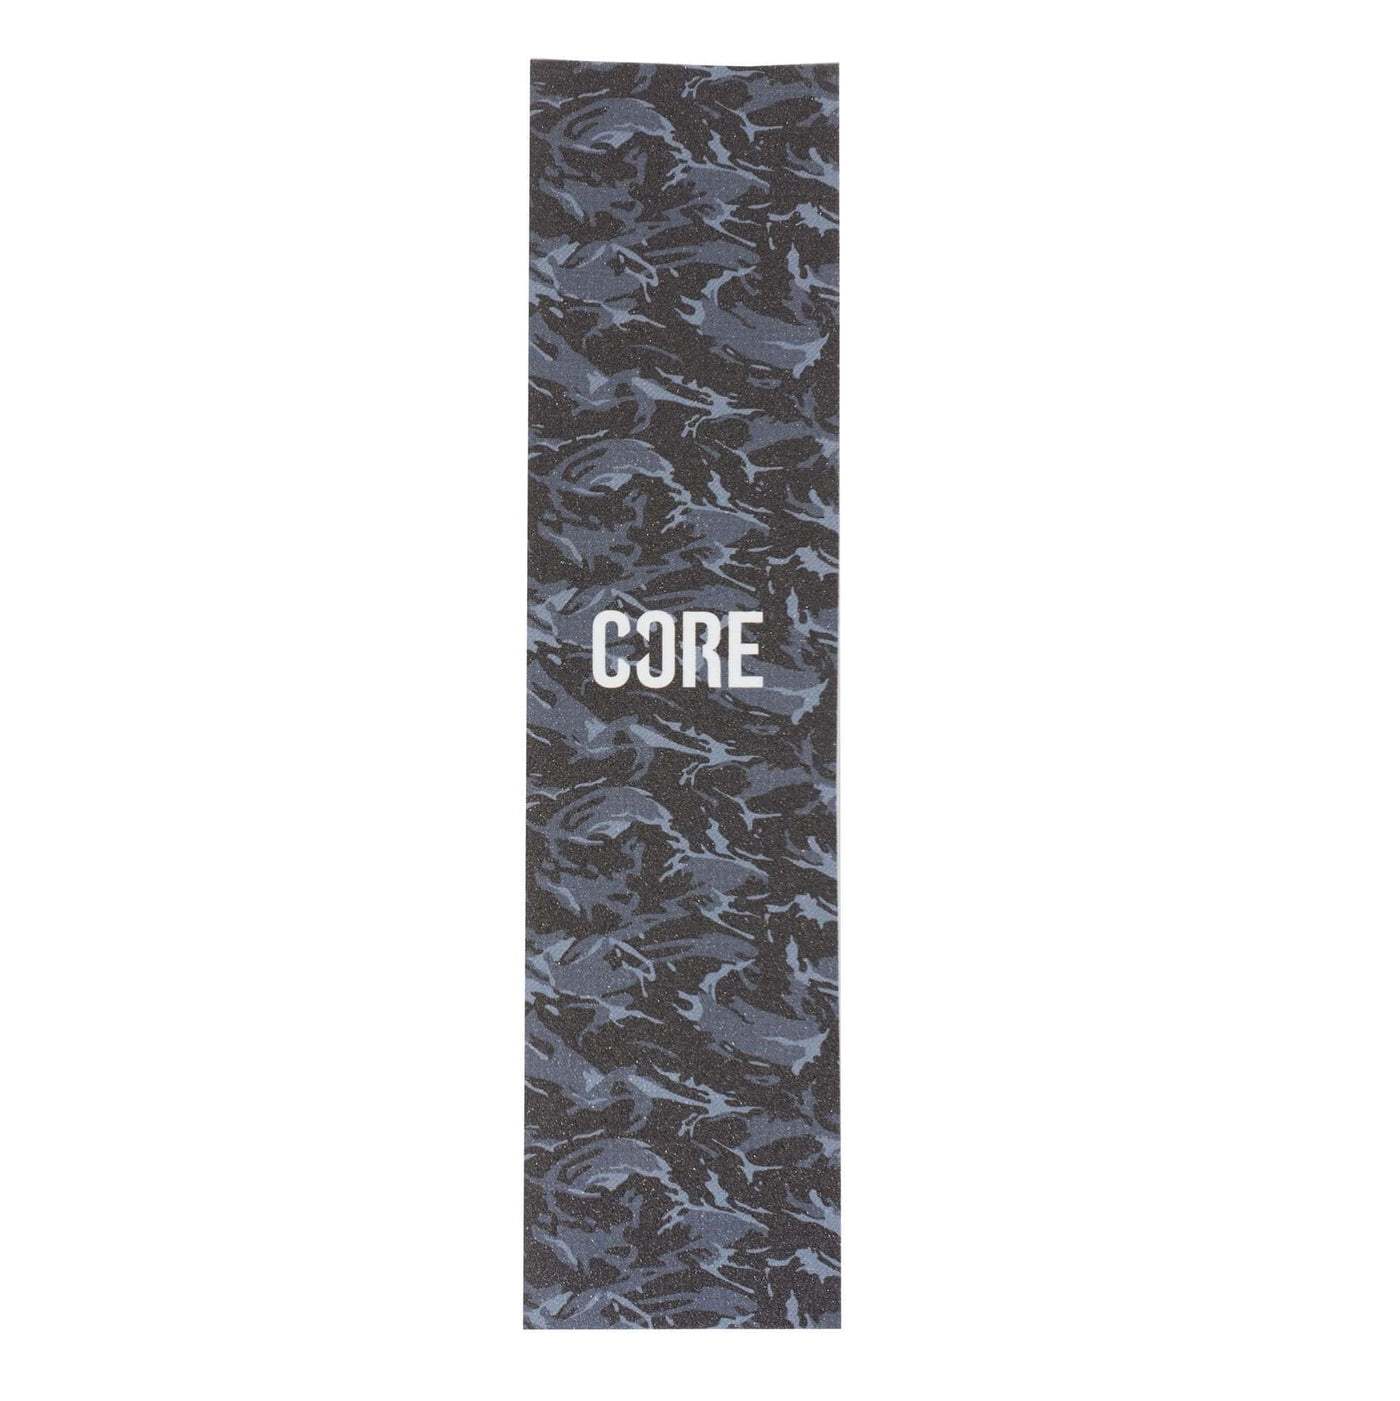 Core Scooter Grip Tape Digital Camo I Grip Tape Scooter